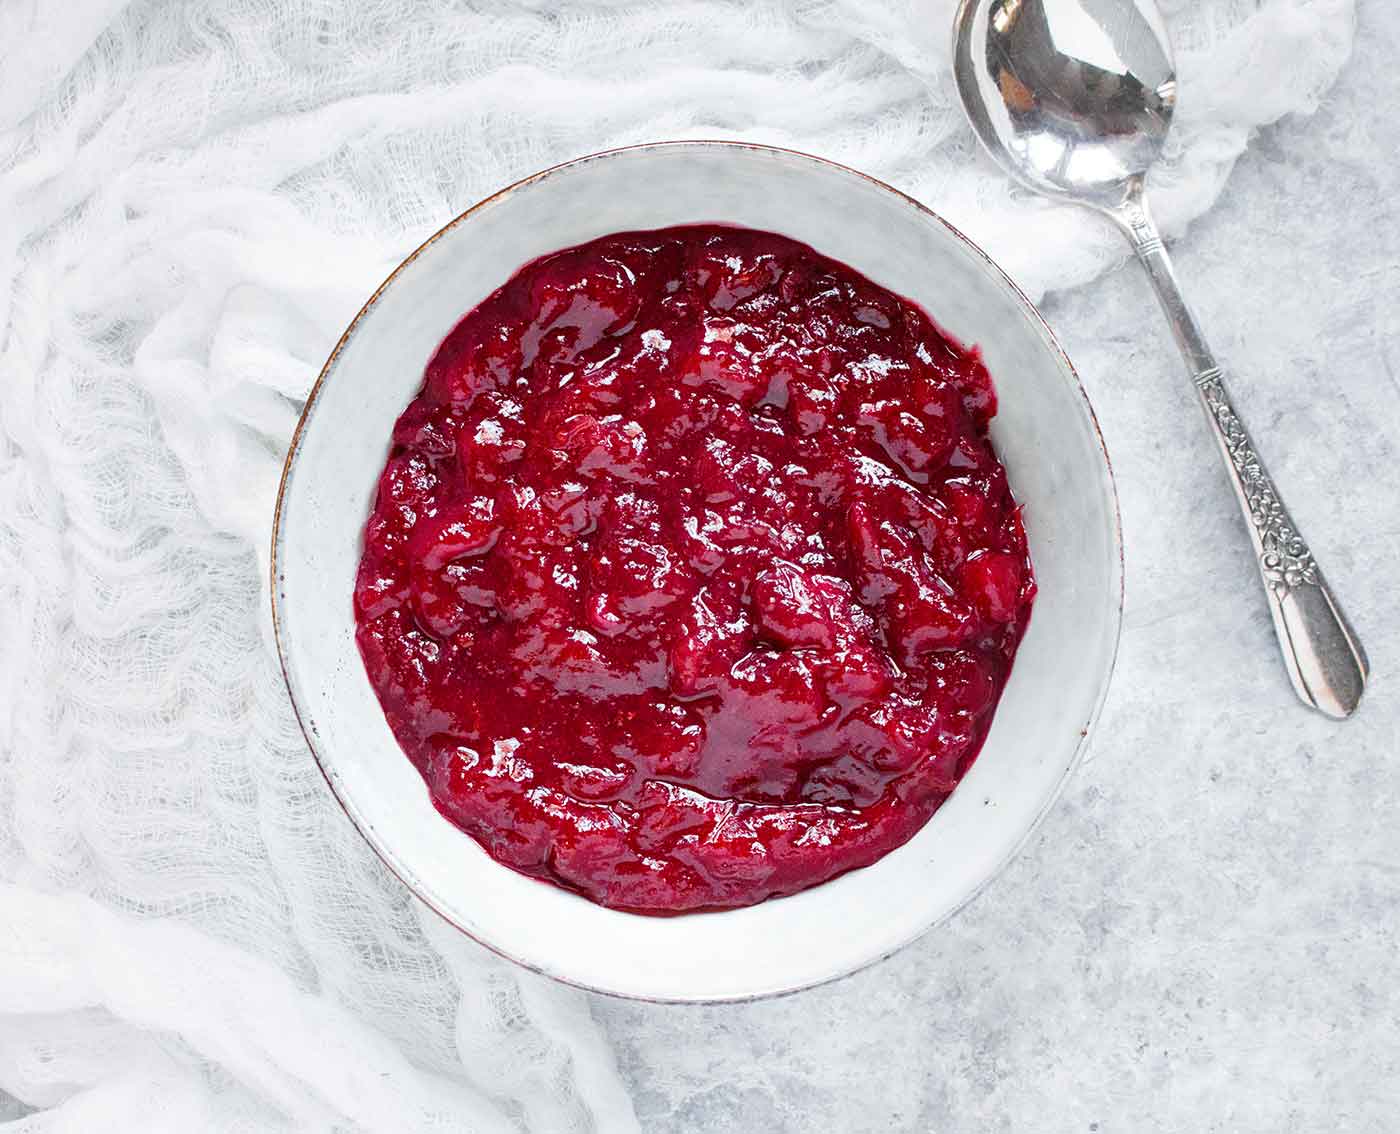 Instant Pot spiced cranberry sauce in a bowl